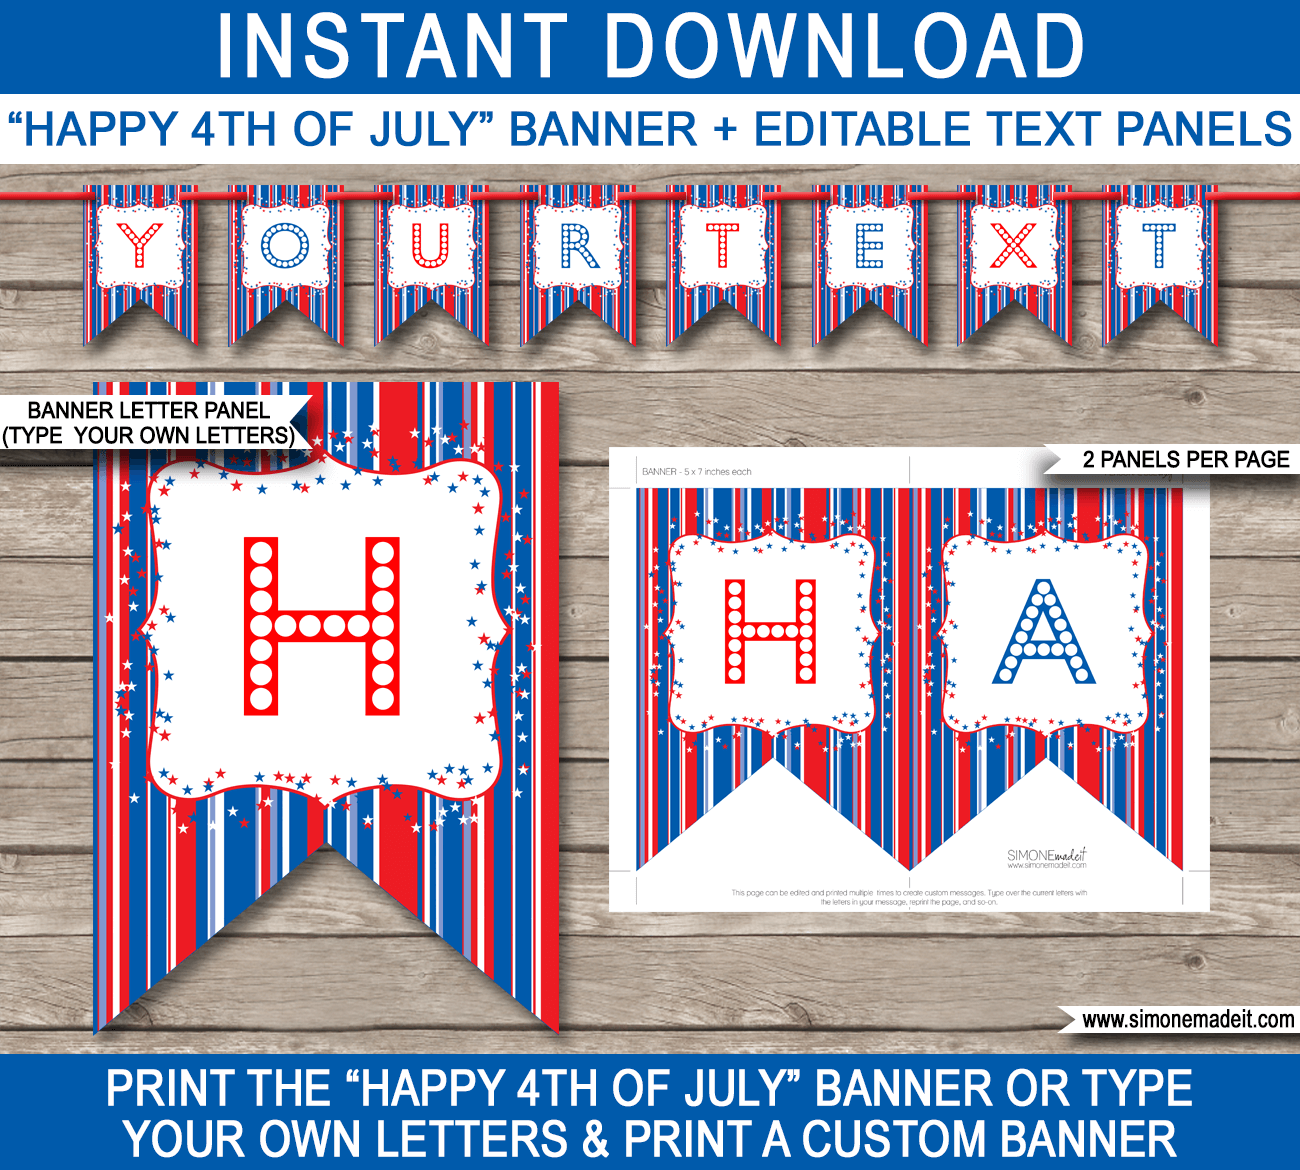 4th of July Party Banner Template - Bunting Template - Fourth of July BBQ - Editable and Printable DIY Template - INSTANT DOWNLOAD $4.50 via simonemadeit.com